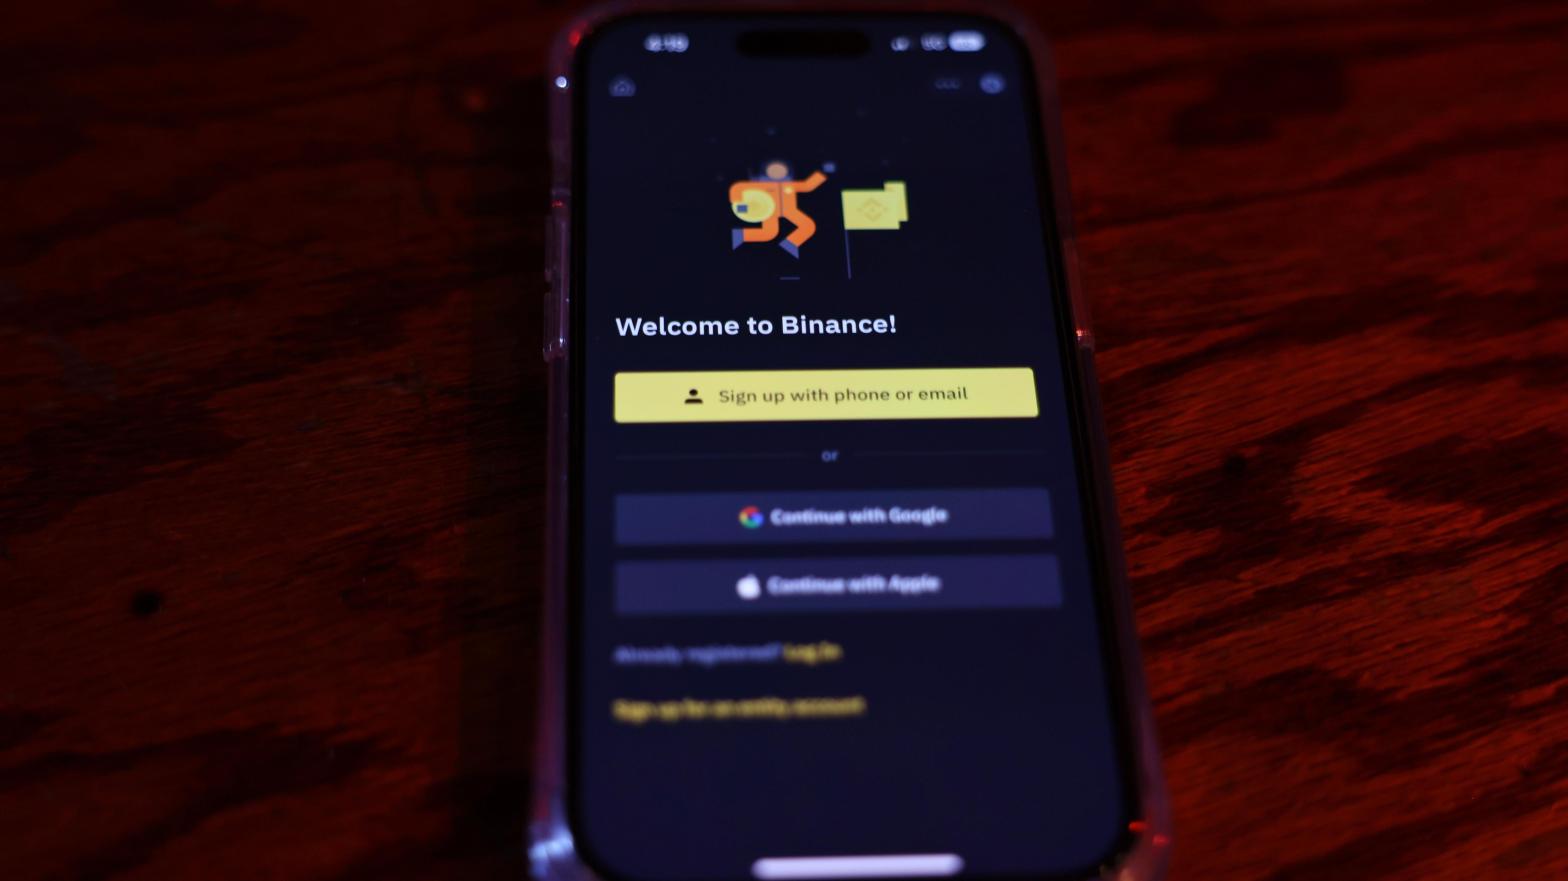 Binance said it was ending support for GBP for all new users on Monday. The exchange plans to end pound support for all customers on May 22. (Photo: Michael M. Santiago, Getty Images)